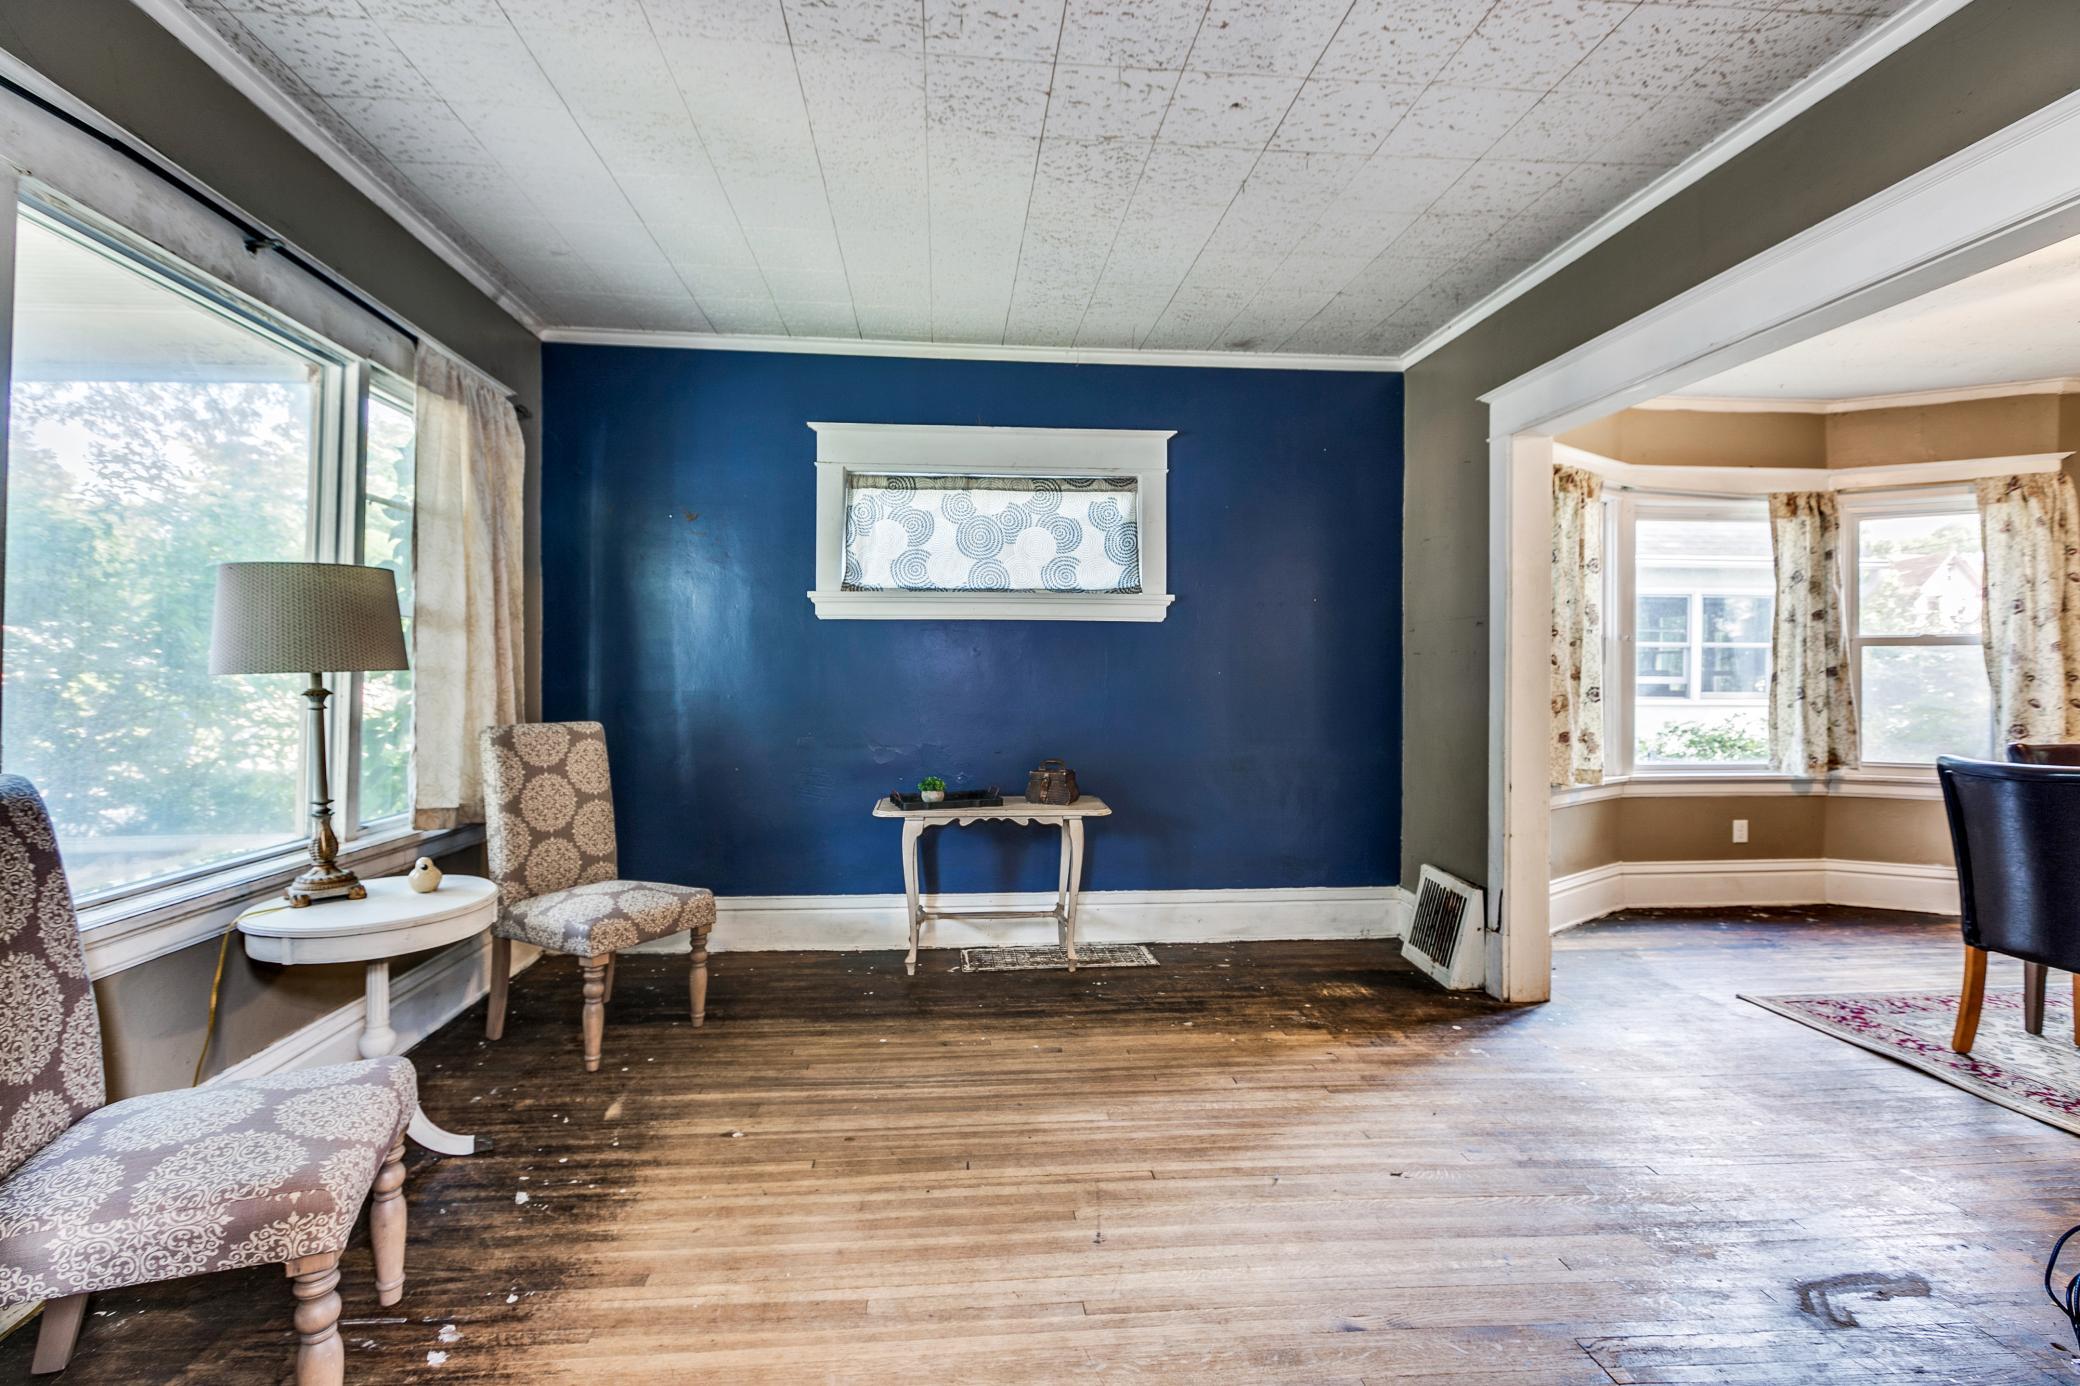 Living room and dining room have hardwood floors that could be gorgeous refinished.